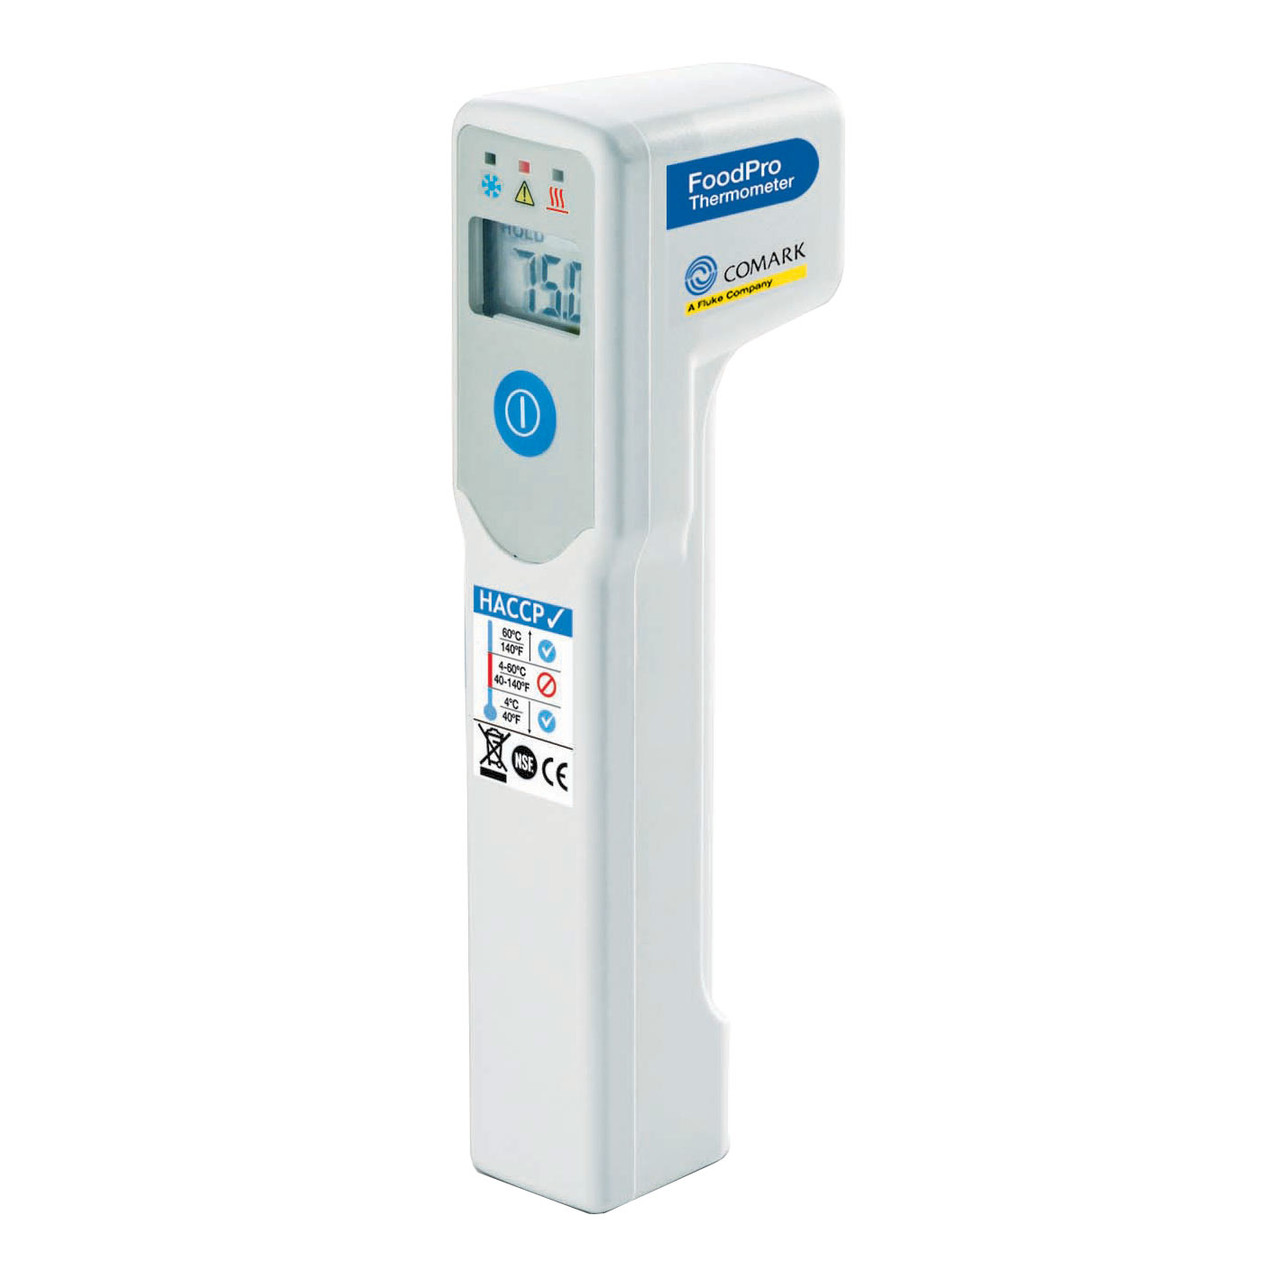 Taylor 9306N Dual Temp HACCP Digital Infrared Thermometer with